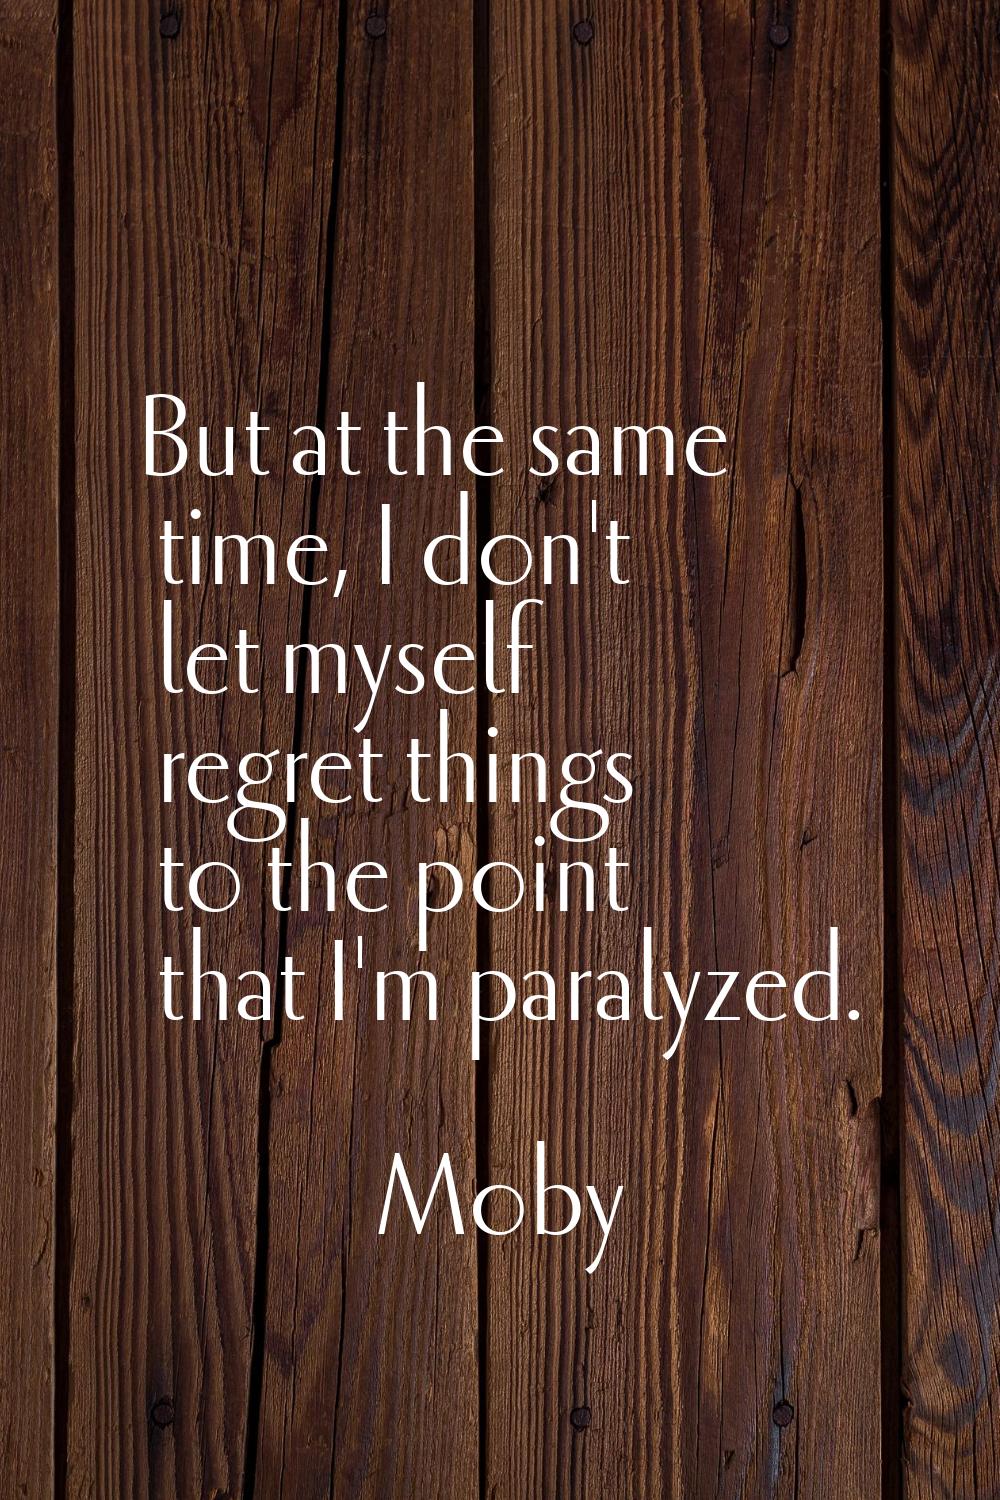 But at the same time, I don't let myself regret things to the point that I'm paralyzed.